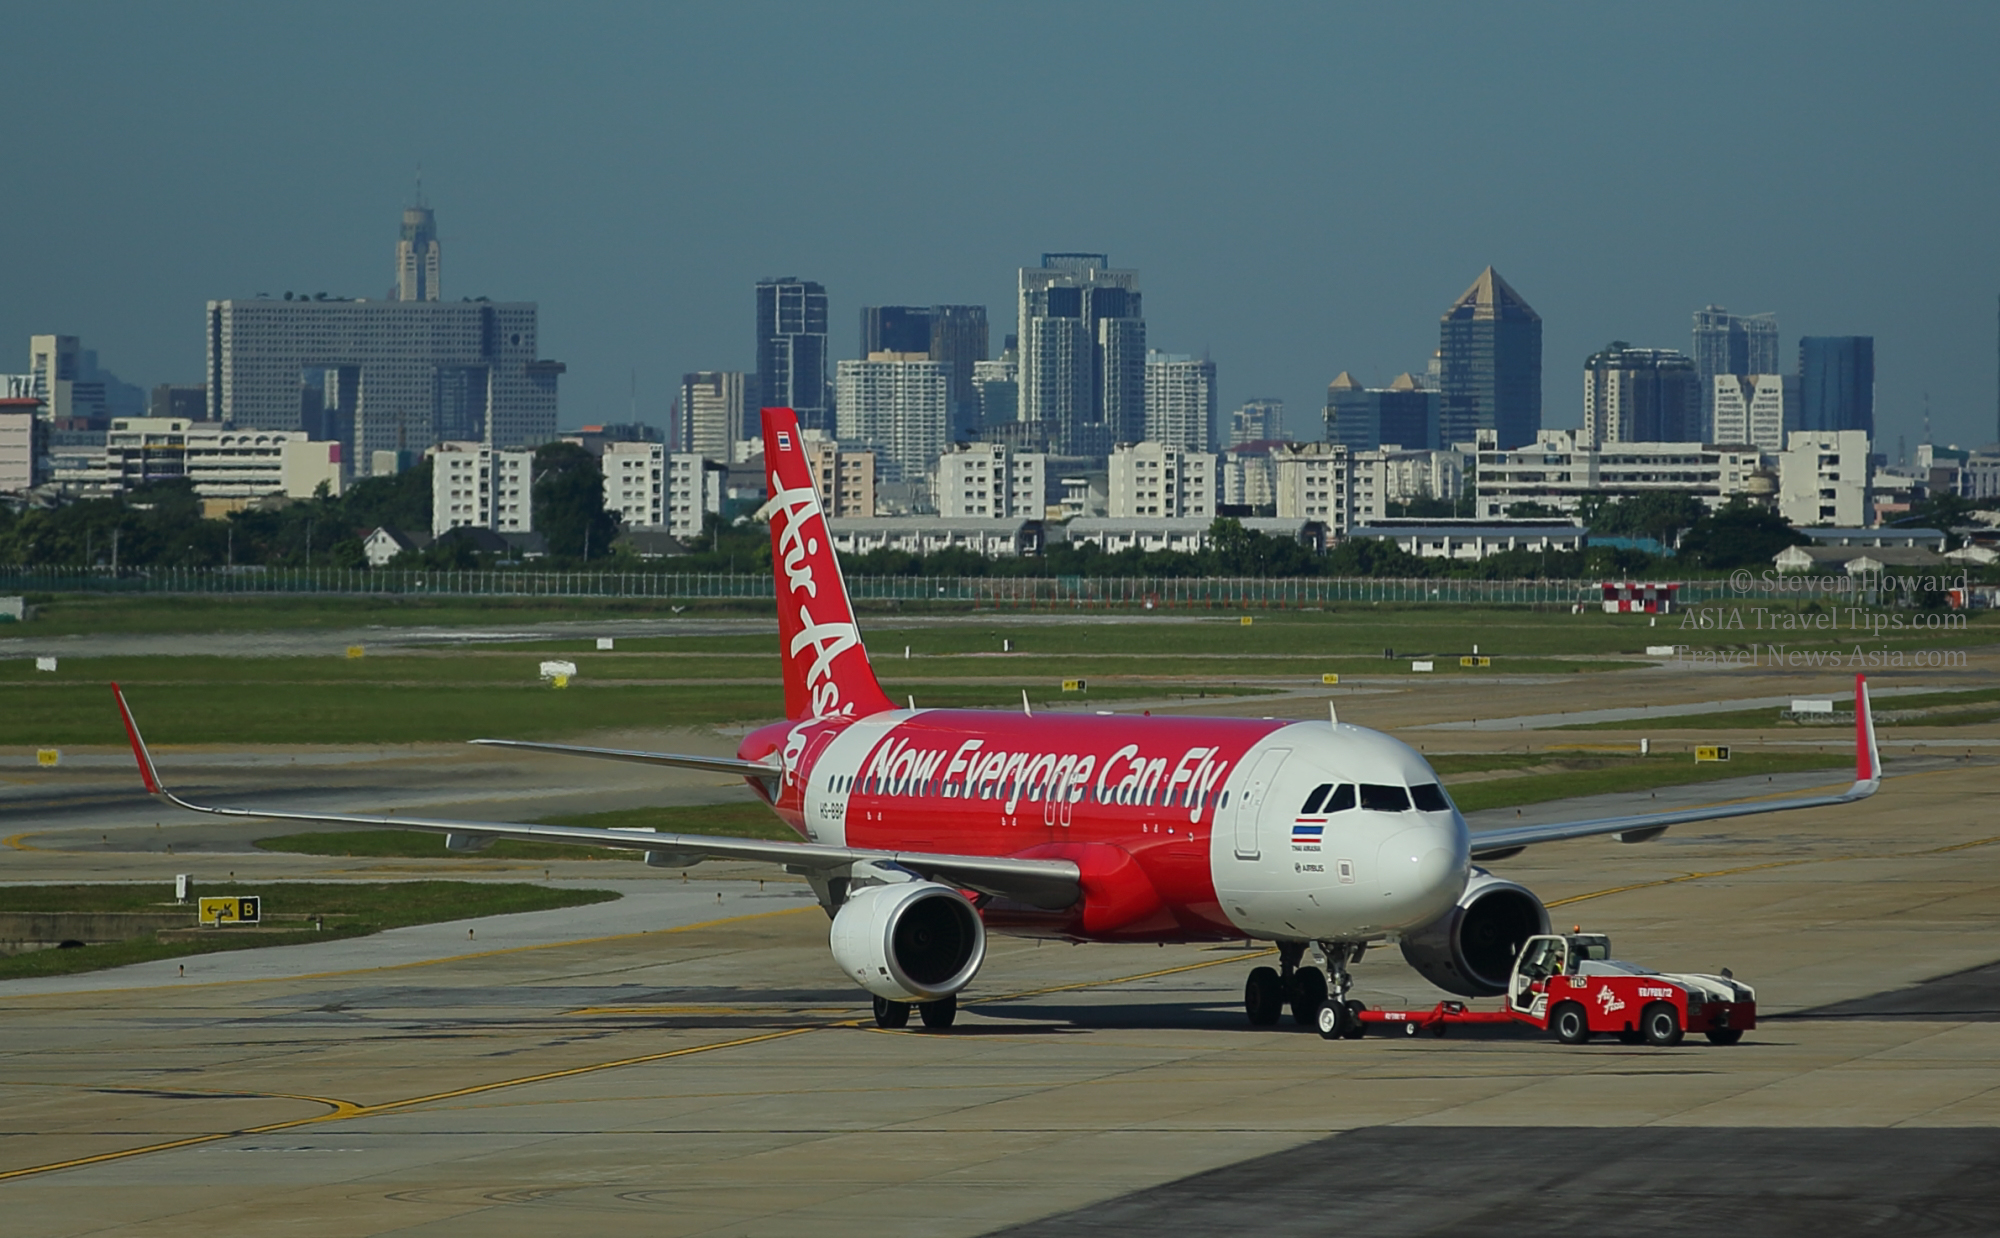 AirAsia Airbus A320 at Don Mueang Airport, Bangkok, Thailand. Picture by Steven Howard of TravelNewsAsia.com Click to enlarge.